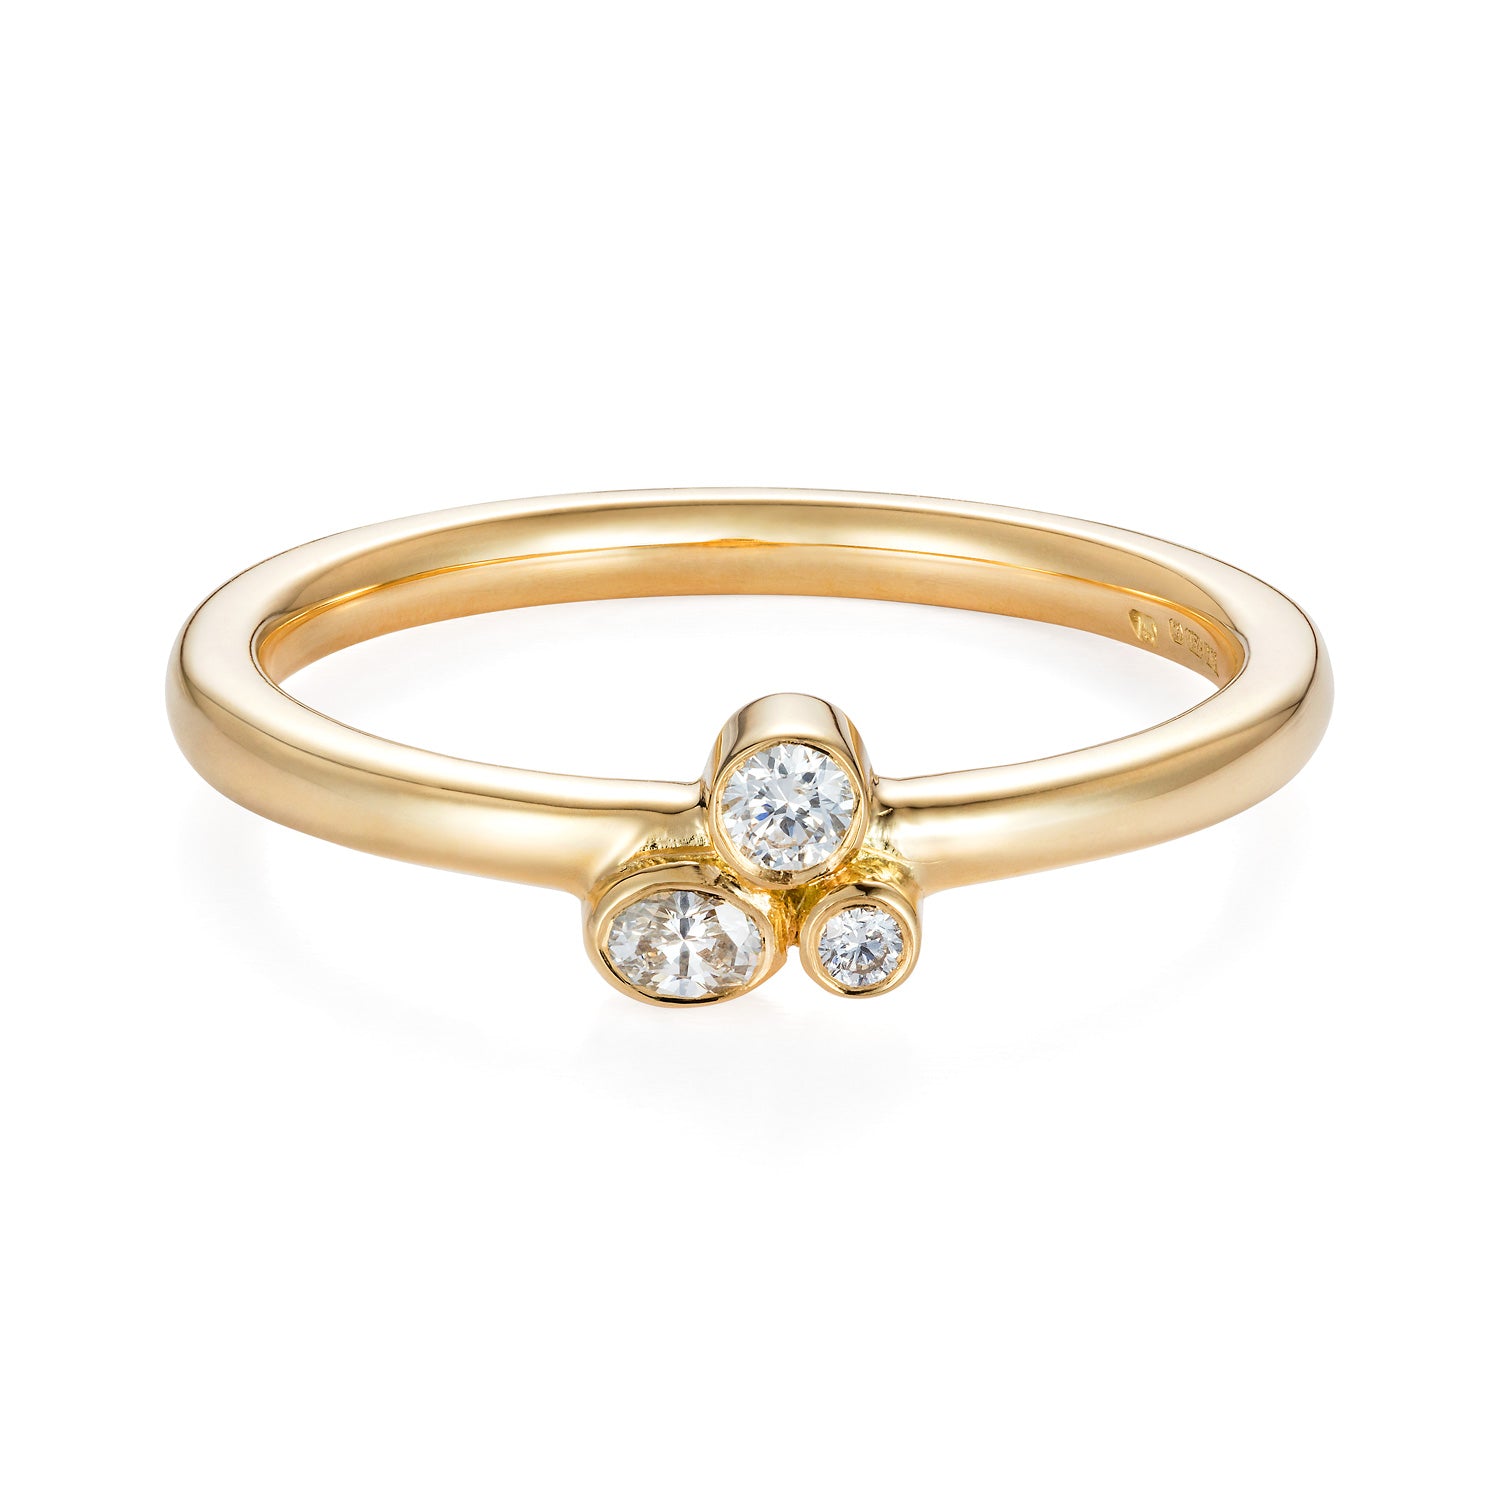 Queen Philippa Engagement Ring by Yasmin Everley